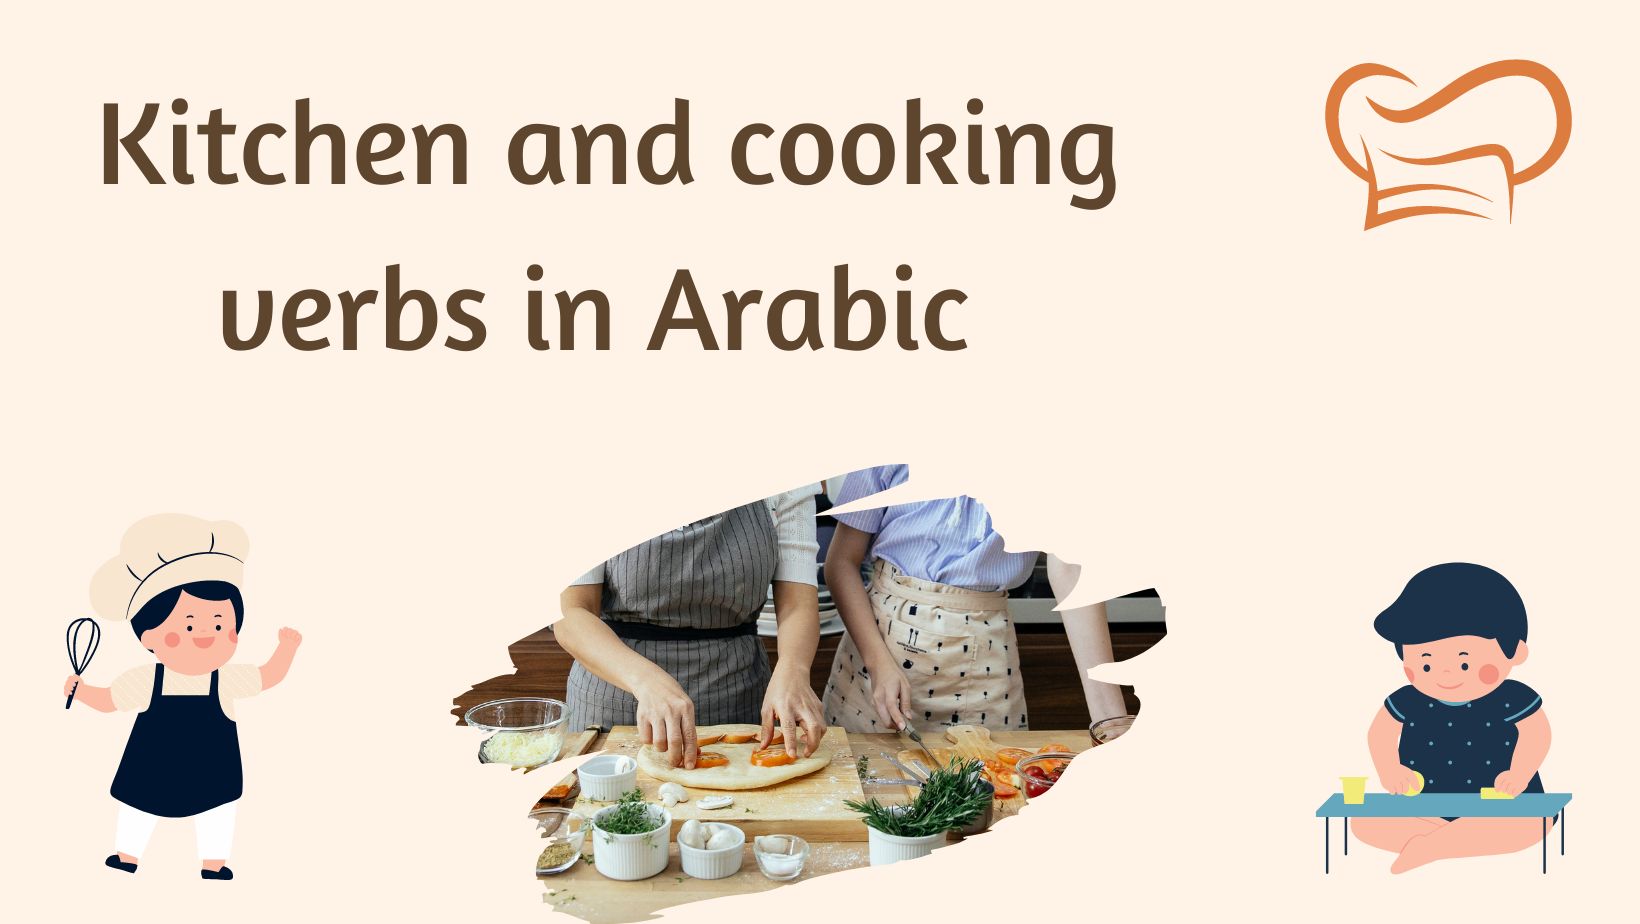 Kitchen and cooking verbs in Arabic